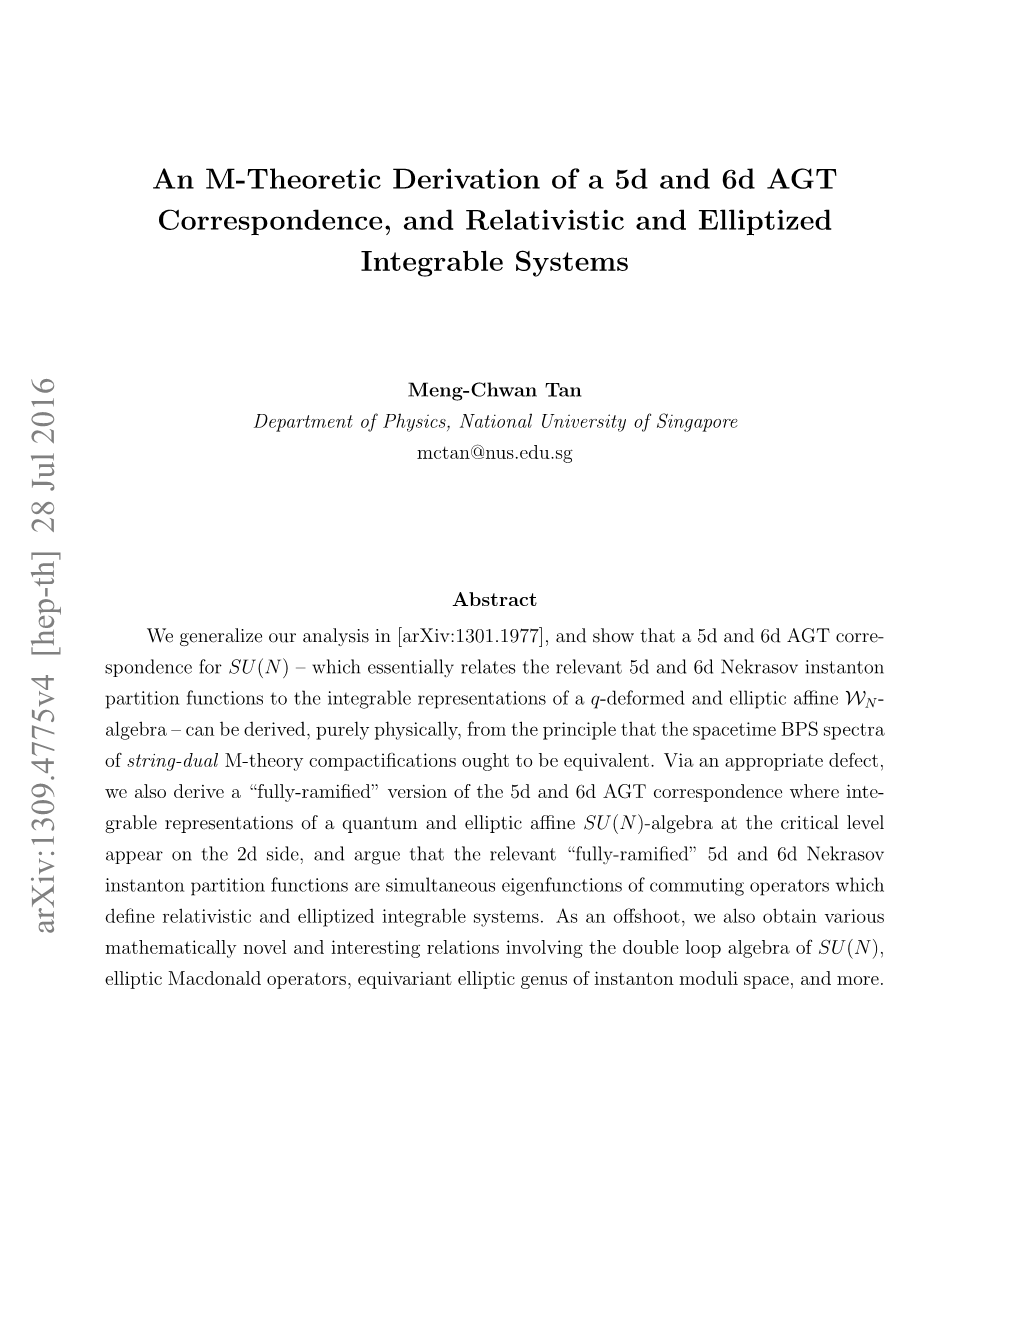 An M-Theoretic Derivation of a 5D and 6D AGT Correspondence, and Relativistic and Elliptized Integrable Systems